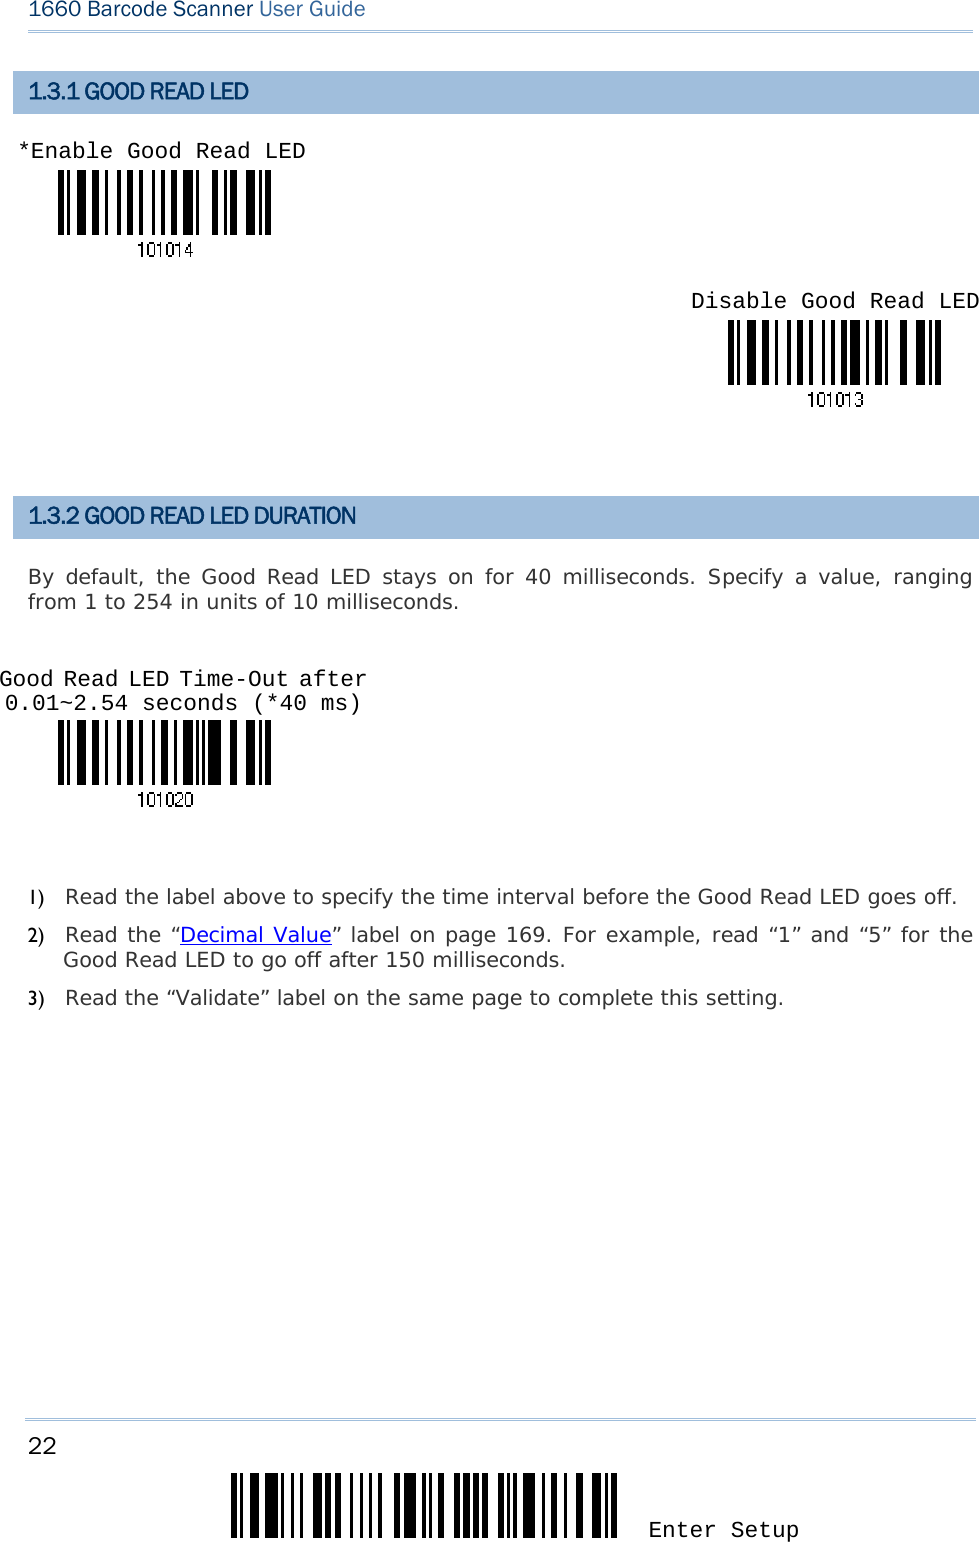 22 Enter Setup 1660 Barcode Scanner User Guide  1.3.1 GOOD READ LED     1.3.2 GOOD READ LED DURATION By default, the Good Read LED stays on for 40 milliseconds. Specify a value, ranging from 1 to 254 in units of 10 milliseconds.    1) Read the label above to specify the time interval before the Good Read LED goes off. 2) Read the “Decimal Value” label on page 169. For example, read “1” and “5” for the Good Read LED to go off after 150 milliseconds.  3) Read the “Validate” label on the same page to complete this setting.       *Enable Good Read LED Disable Good Read LED Good Read LED Time-Out after 0.01~2.54 seconds (*40 ms) 